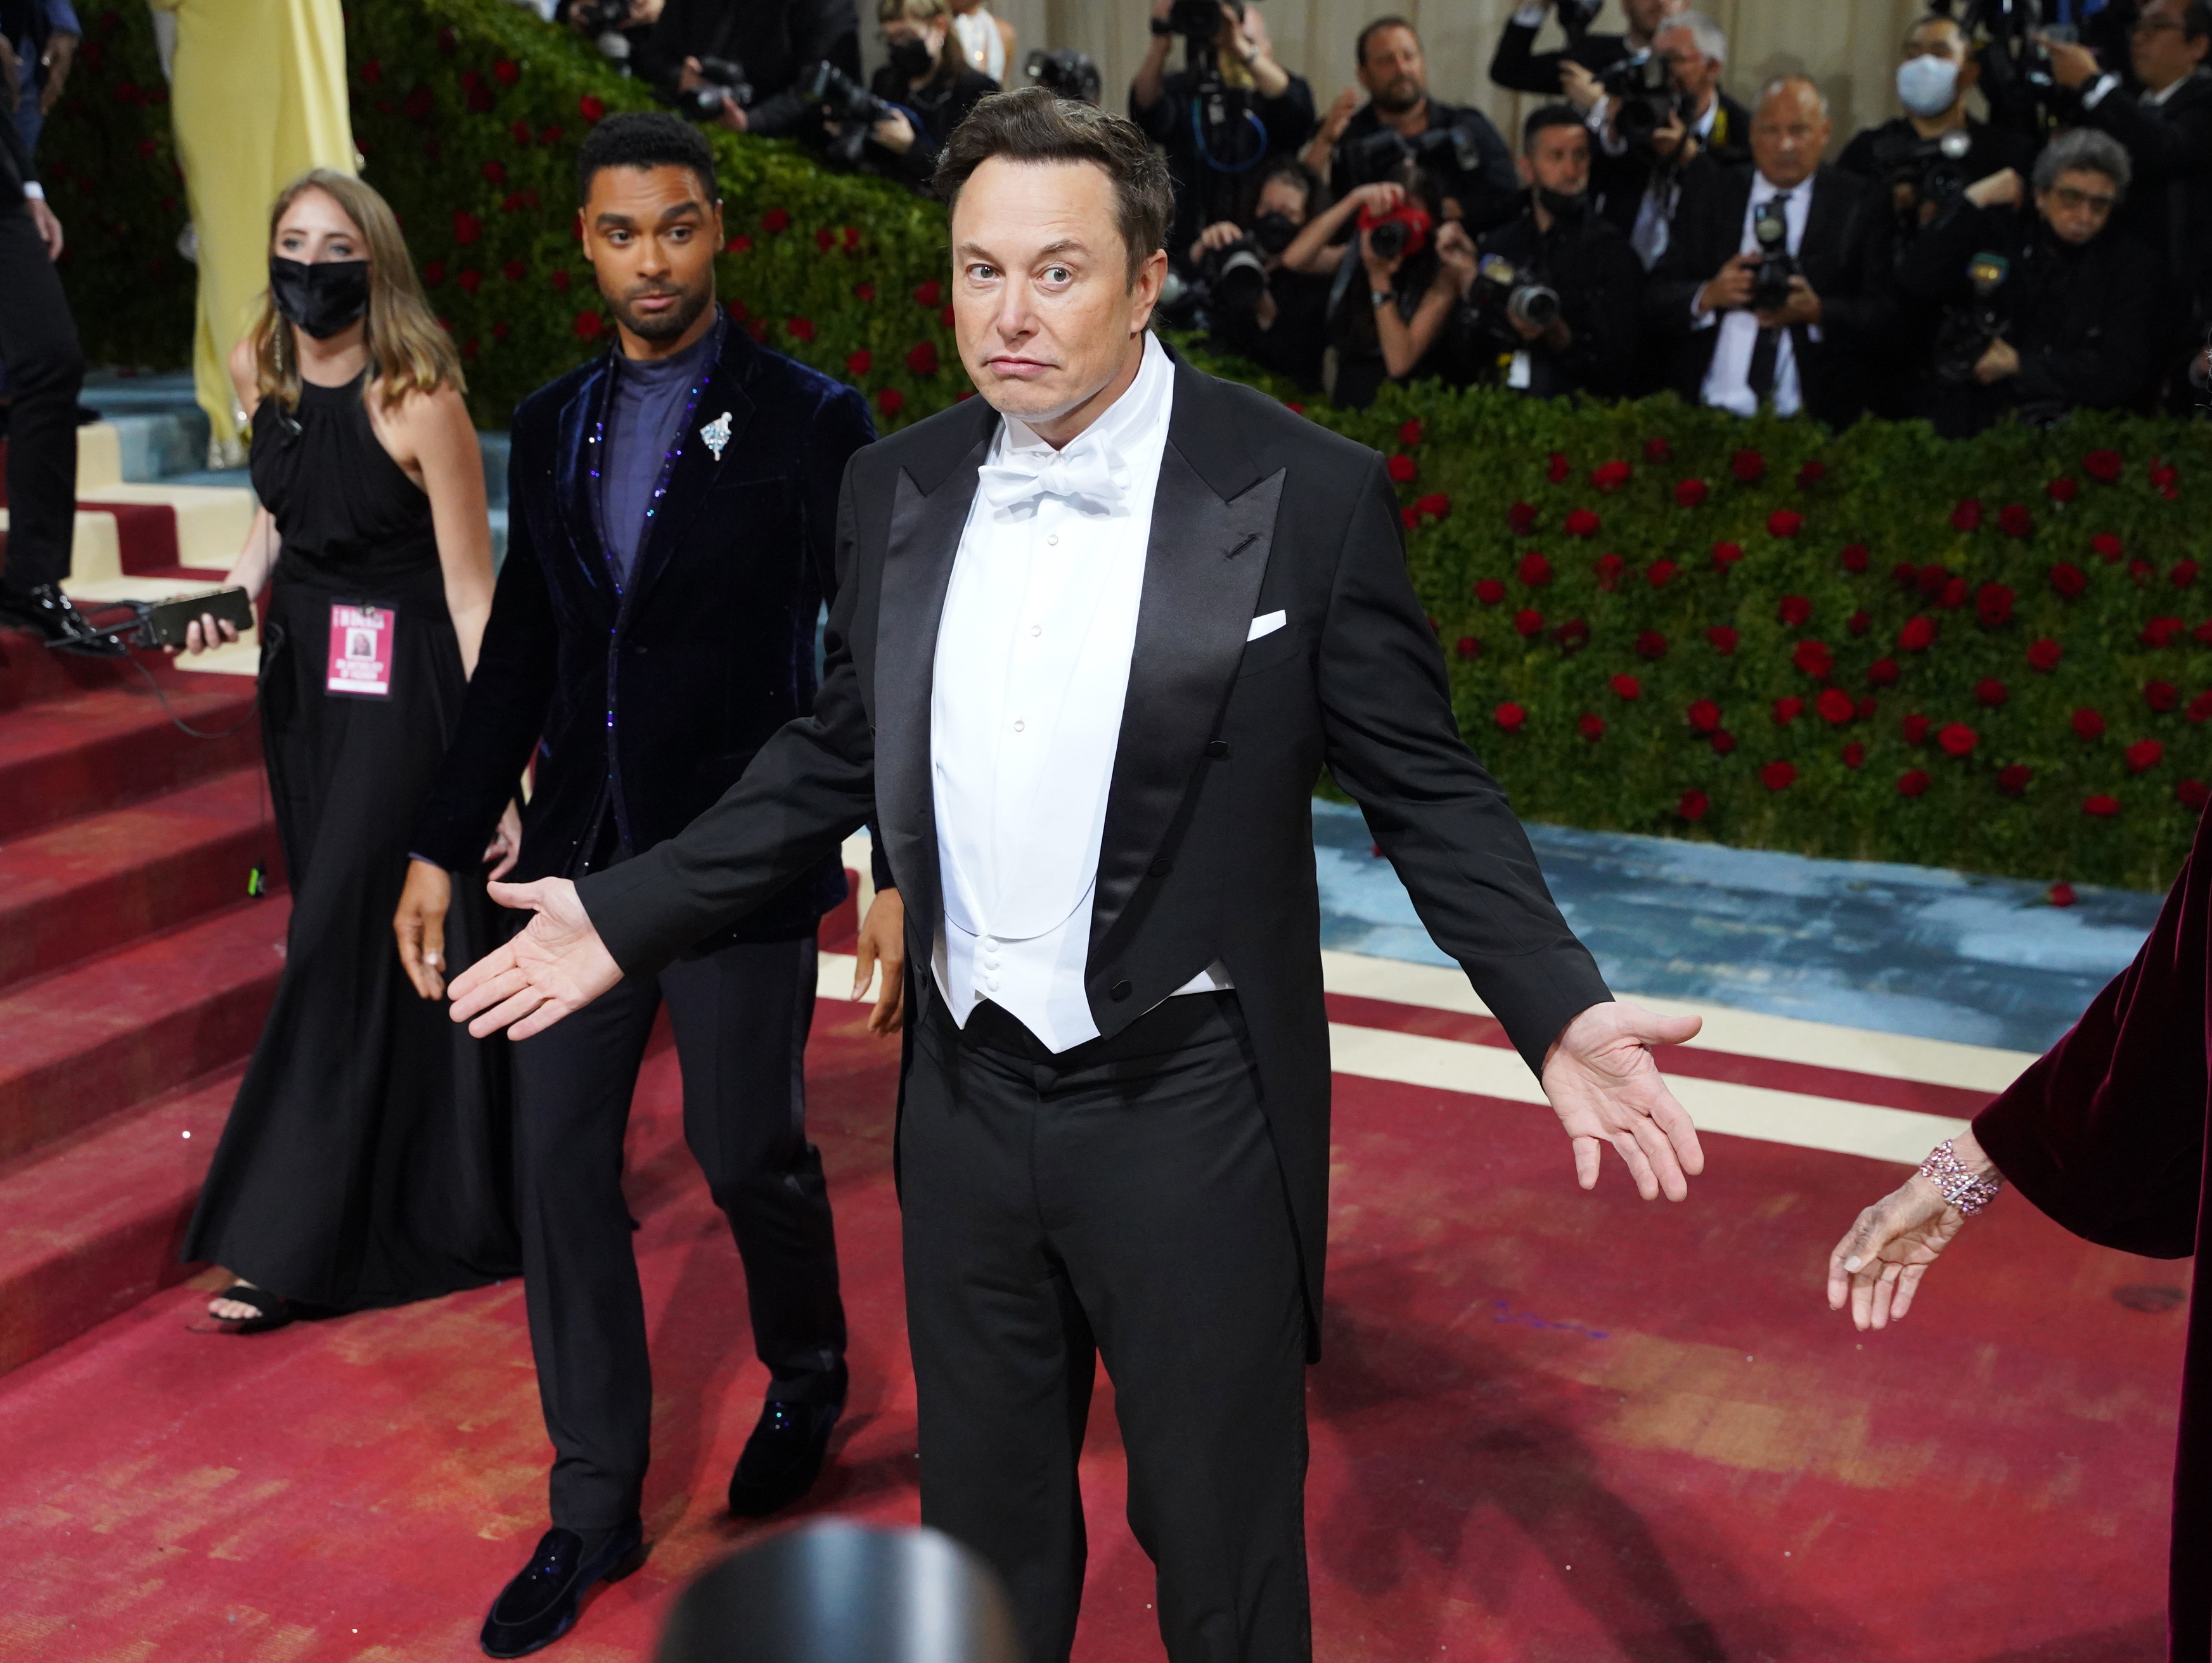 Elon Musk, wearing a tuxedo and making a “who me?” gesture, at a red carpet event.